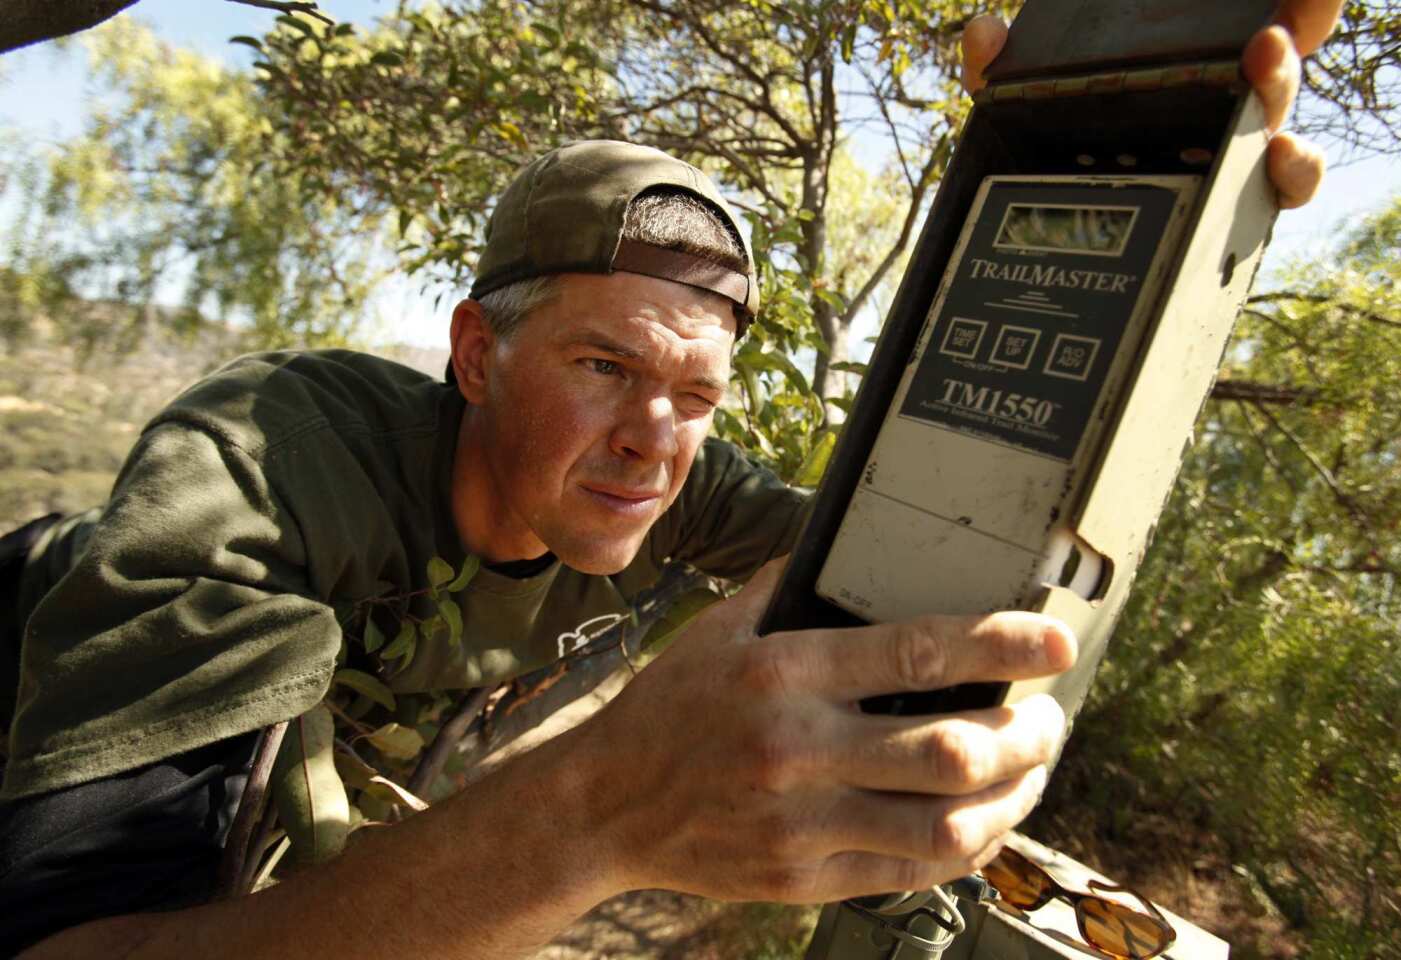 Jeff Sikich, wildlife biologist with the National Park Service, adjusts the infrared trigger used on remote cameras in Griffith Park to monitor possible activity by mountain lion P-22.